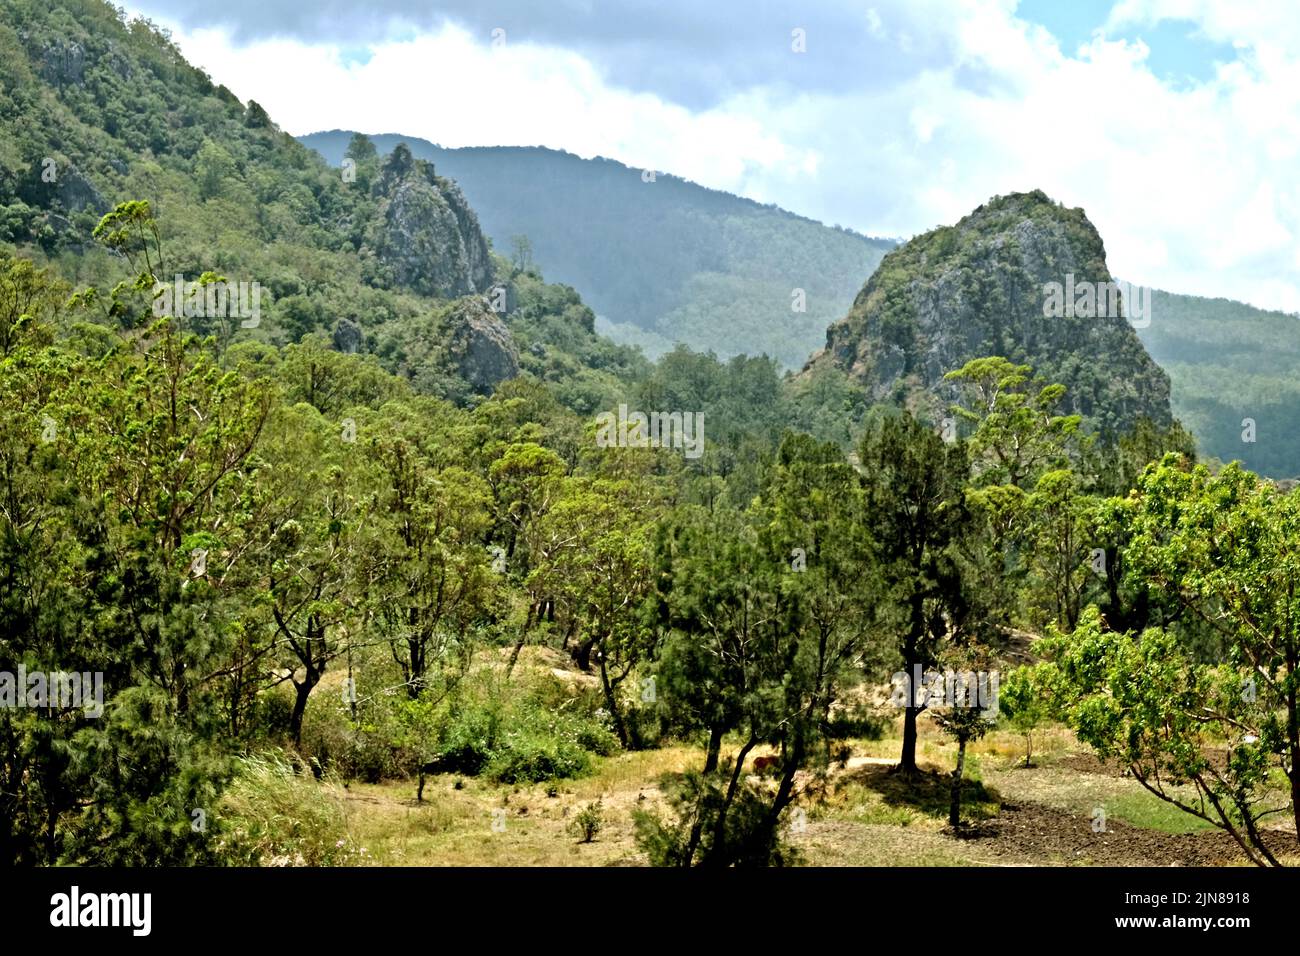 View of a landscape near Fatumnasi village in South Central Timor, East Nusa Tenggara, Indonesia. Stock Photo